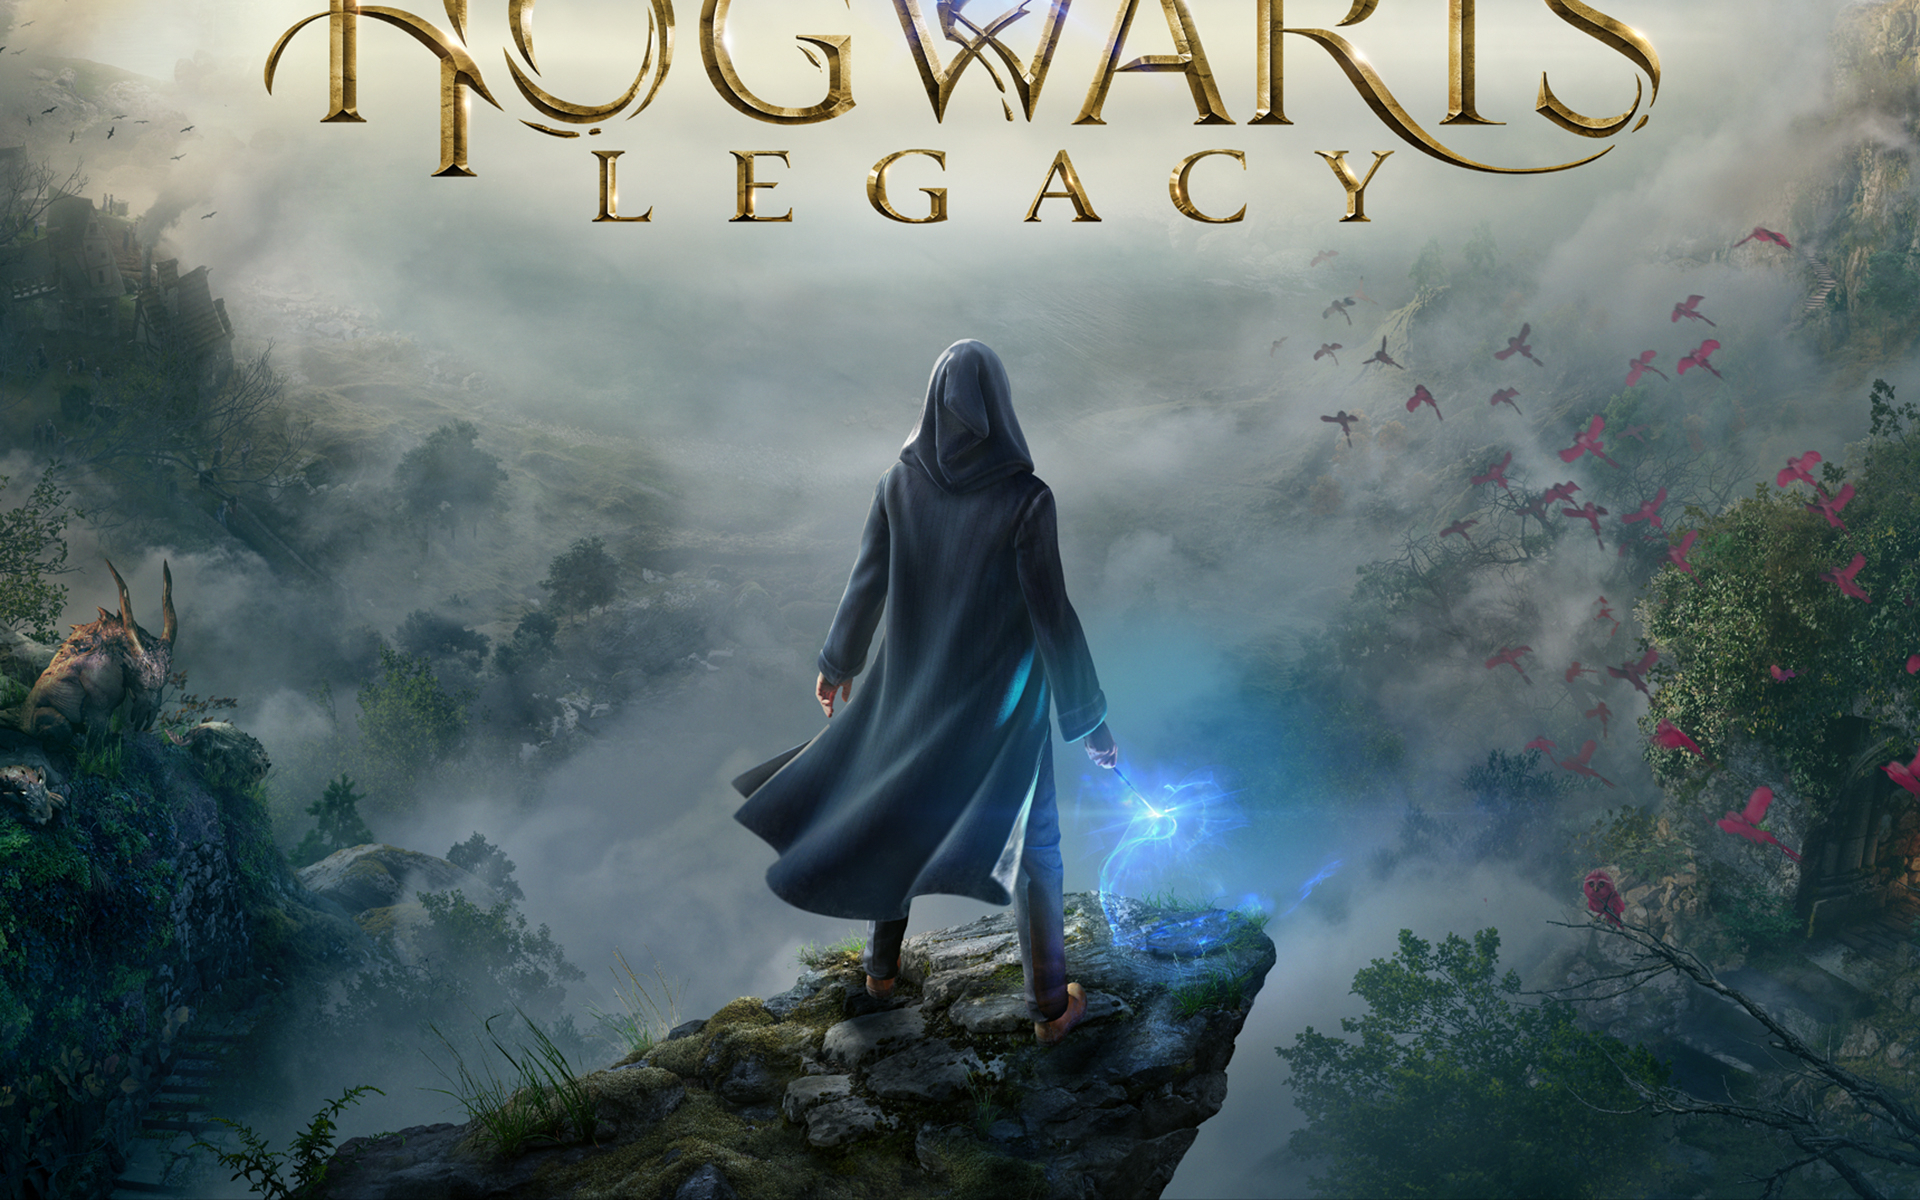 hogwarts legacy deluxe edition wallpaper